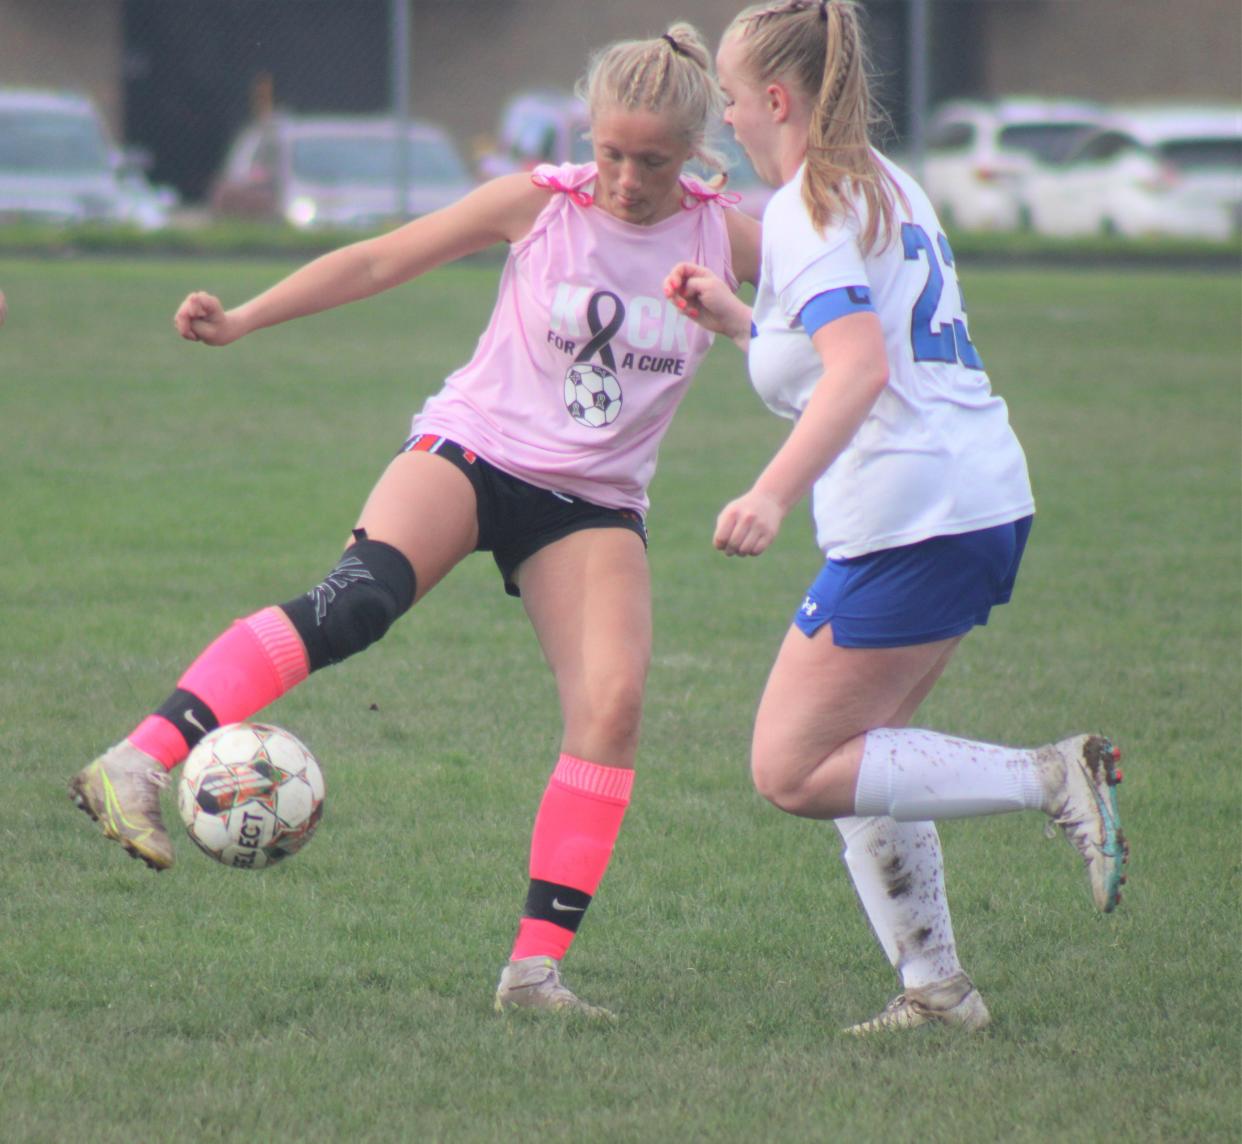 Cheboygan senior Taylor Bent (left) attempts to dribble past an Oscoda player during the first half on Wednesday.